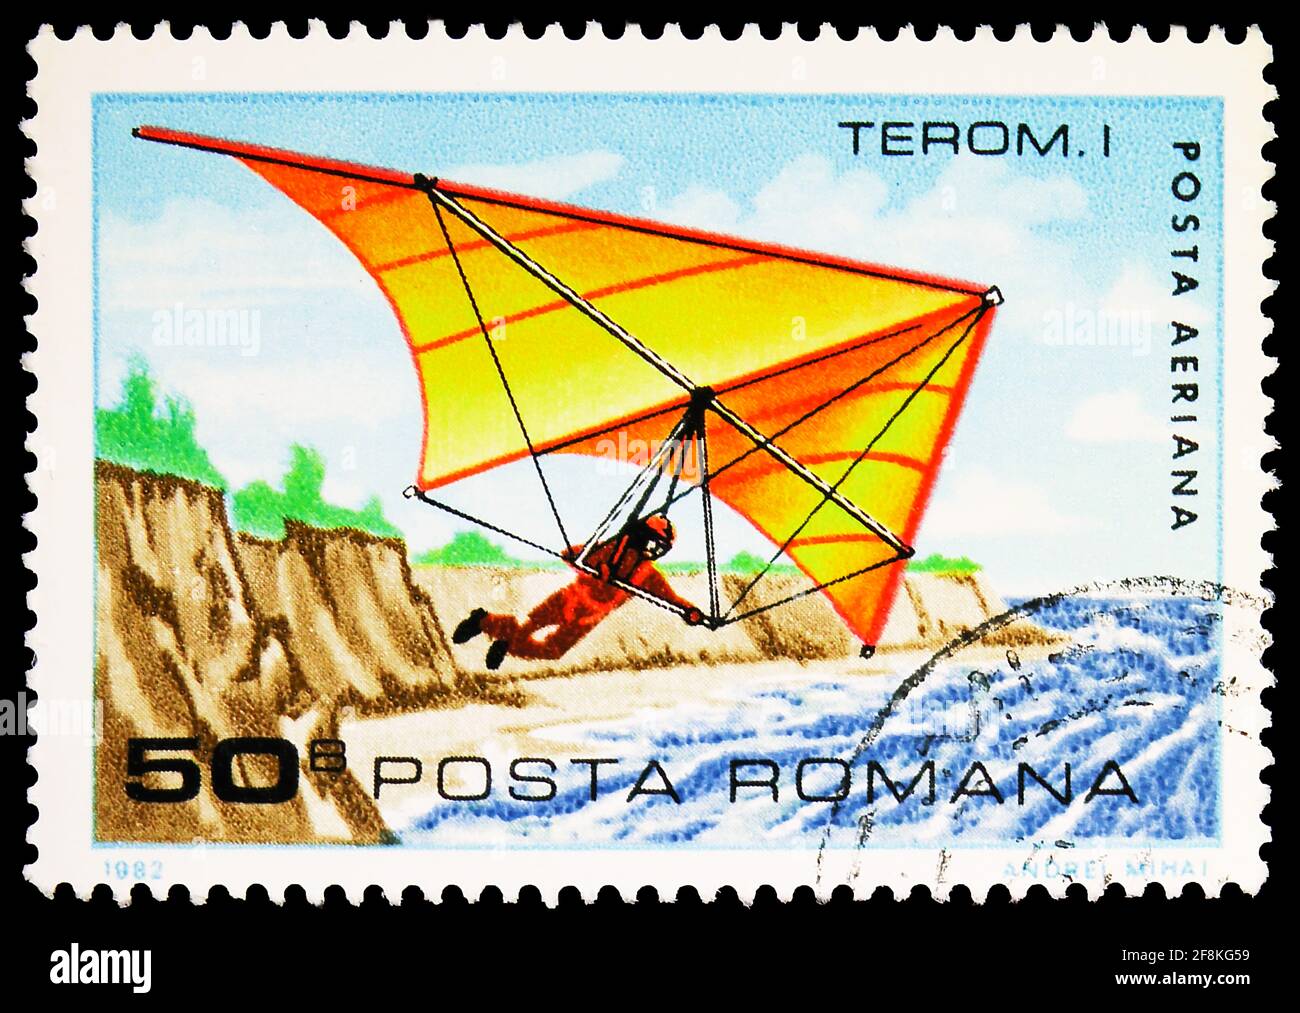 MOSCOW, RUSSIA - NOVEMBER 10, 2019: Postage stamp printed in Romania shows Standard I, Gliding serie, circa 1982 Stock Photo